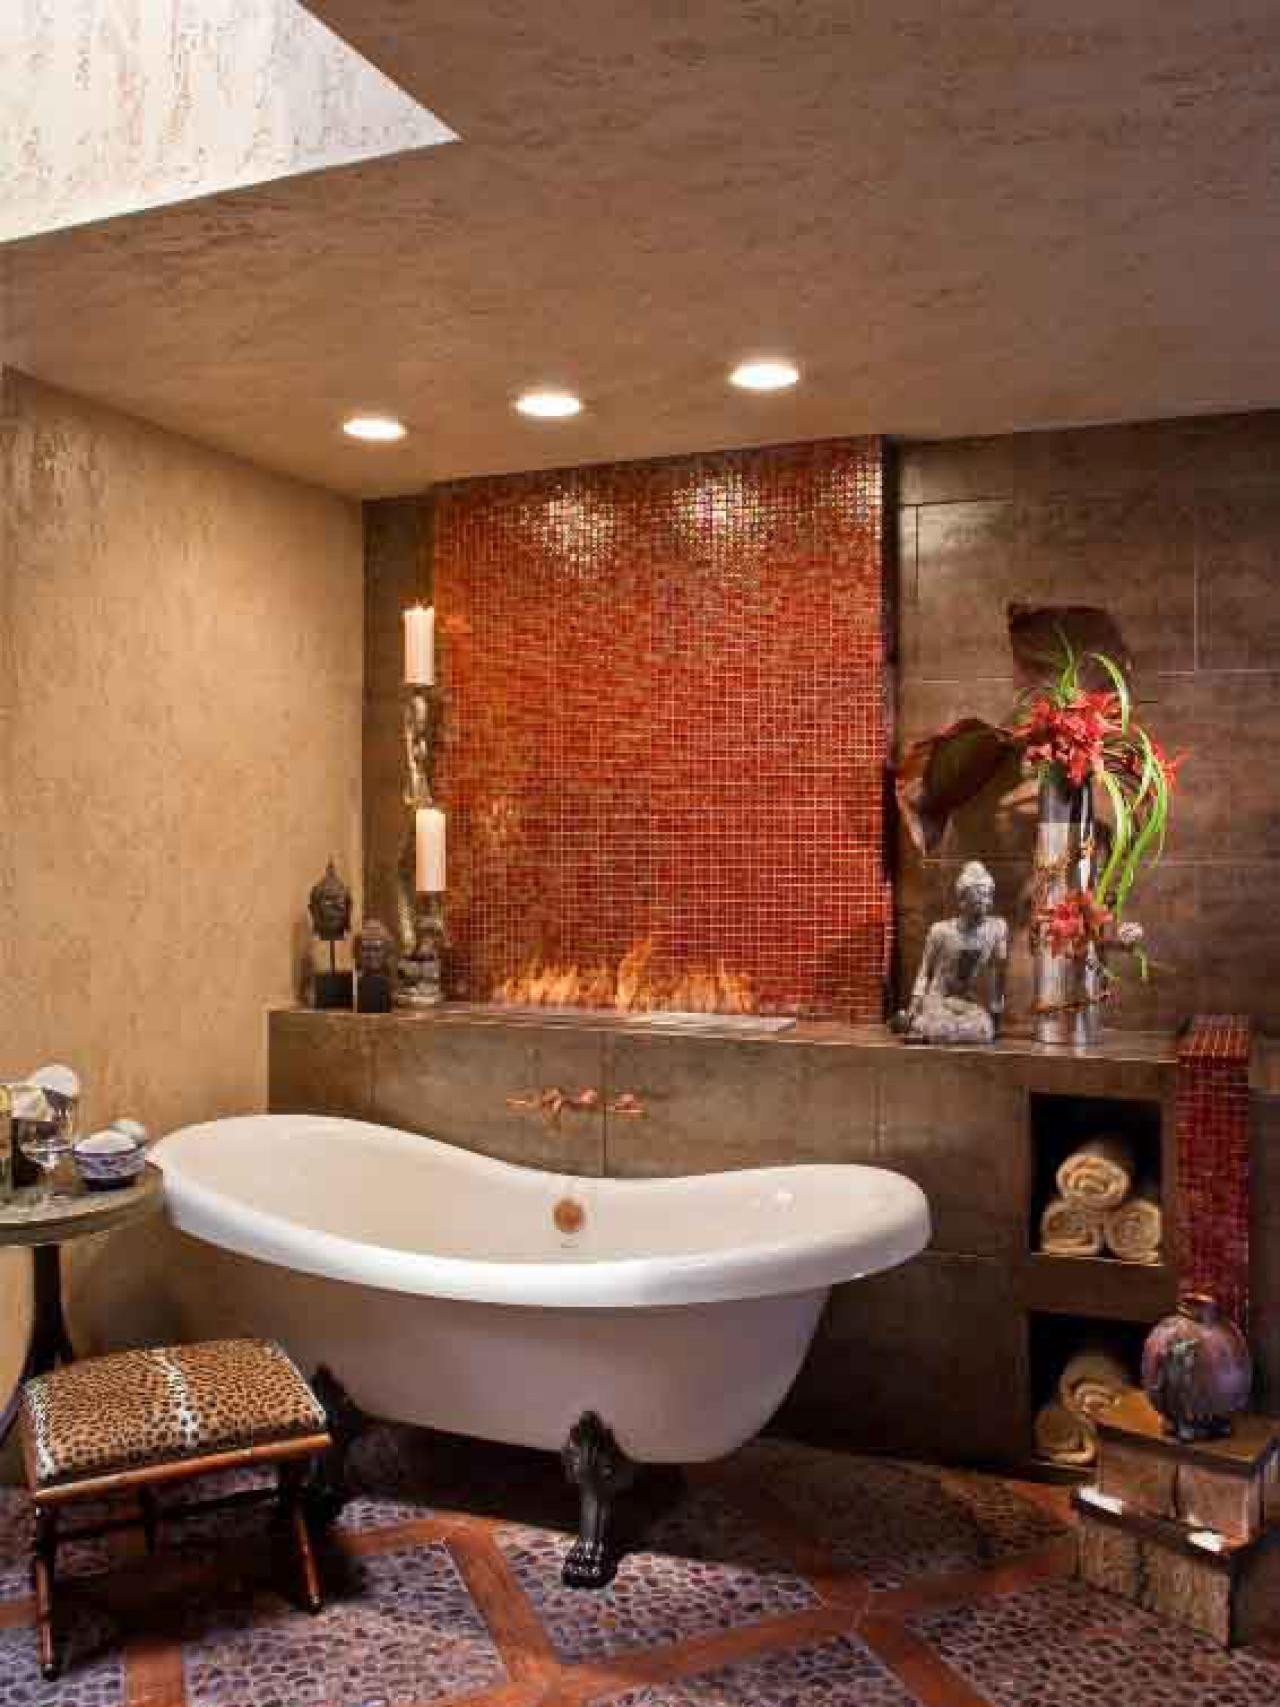 99 Excelent Red And Brown Bathroom Accessories Image Ideas